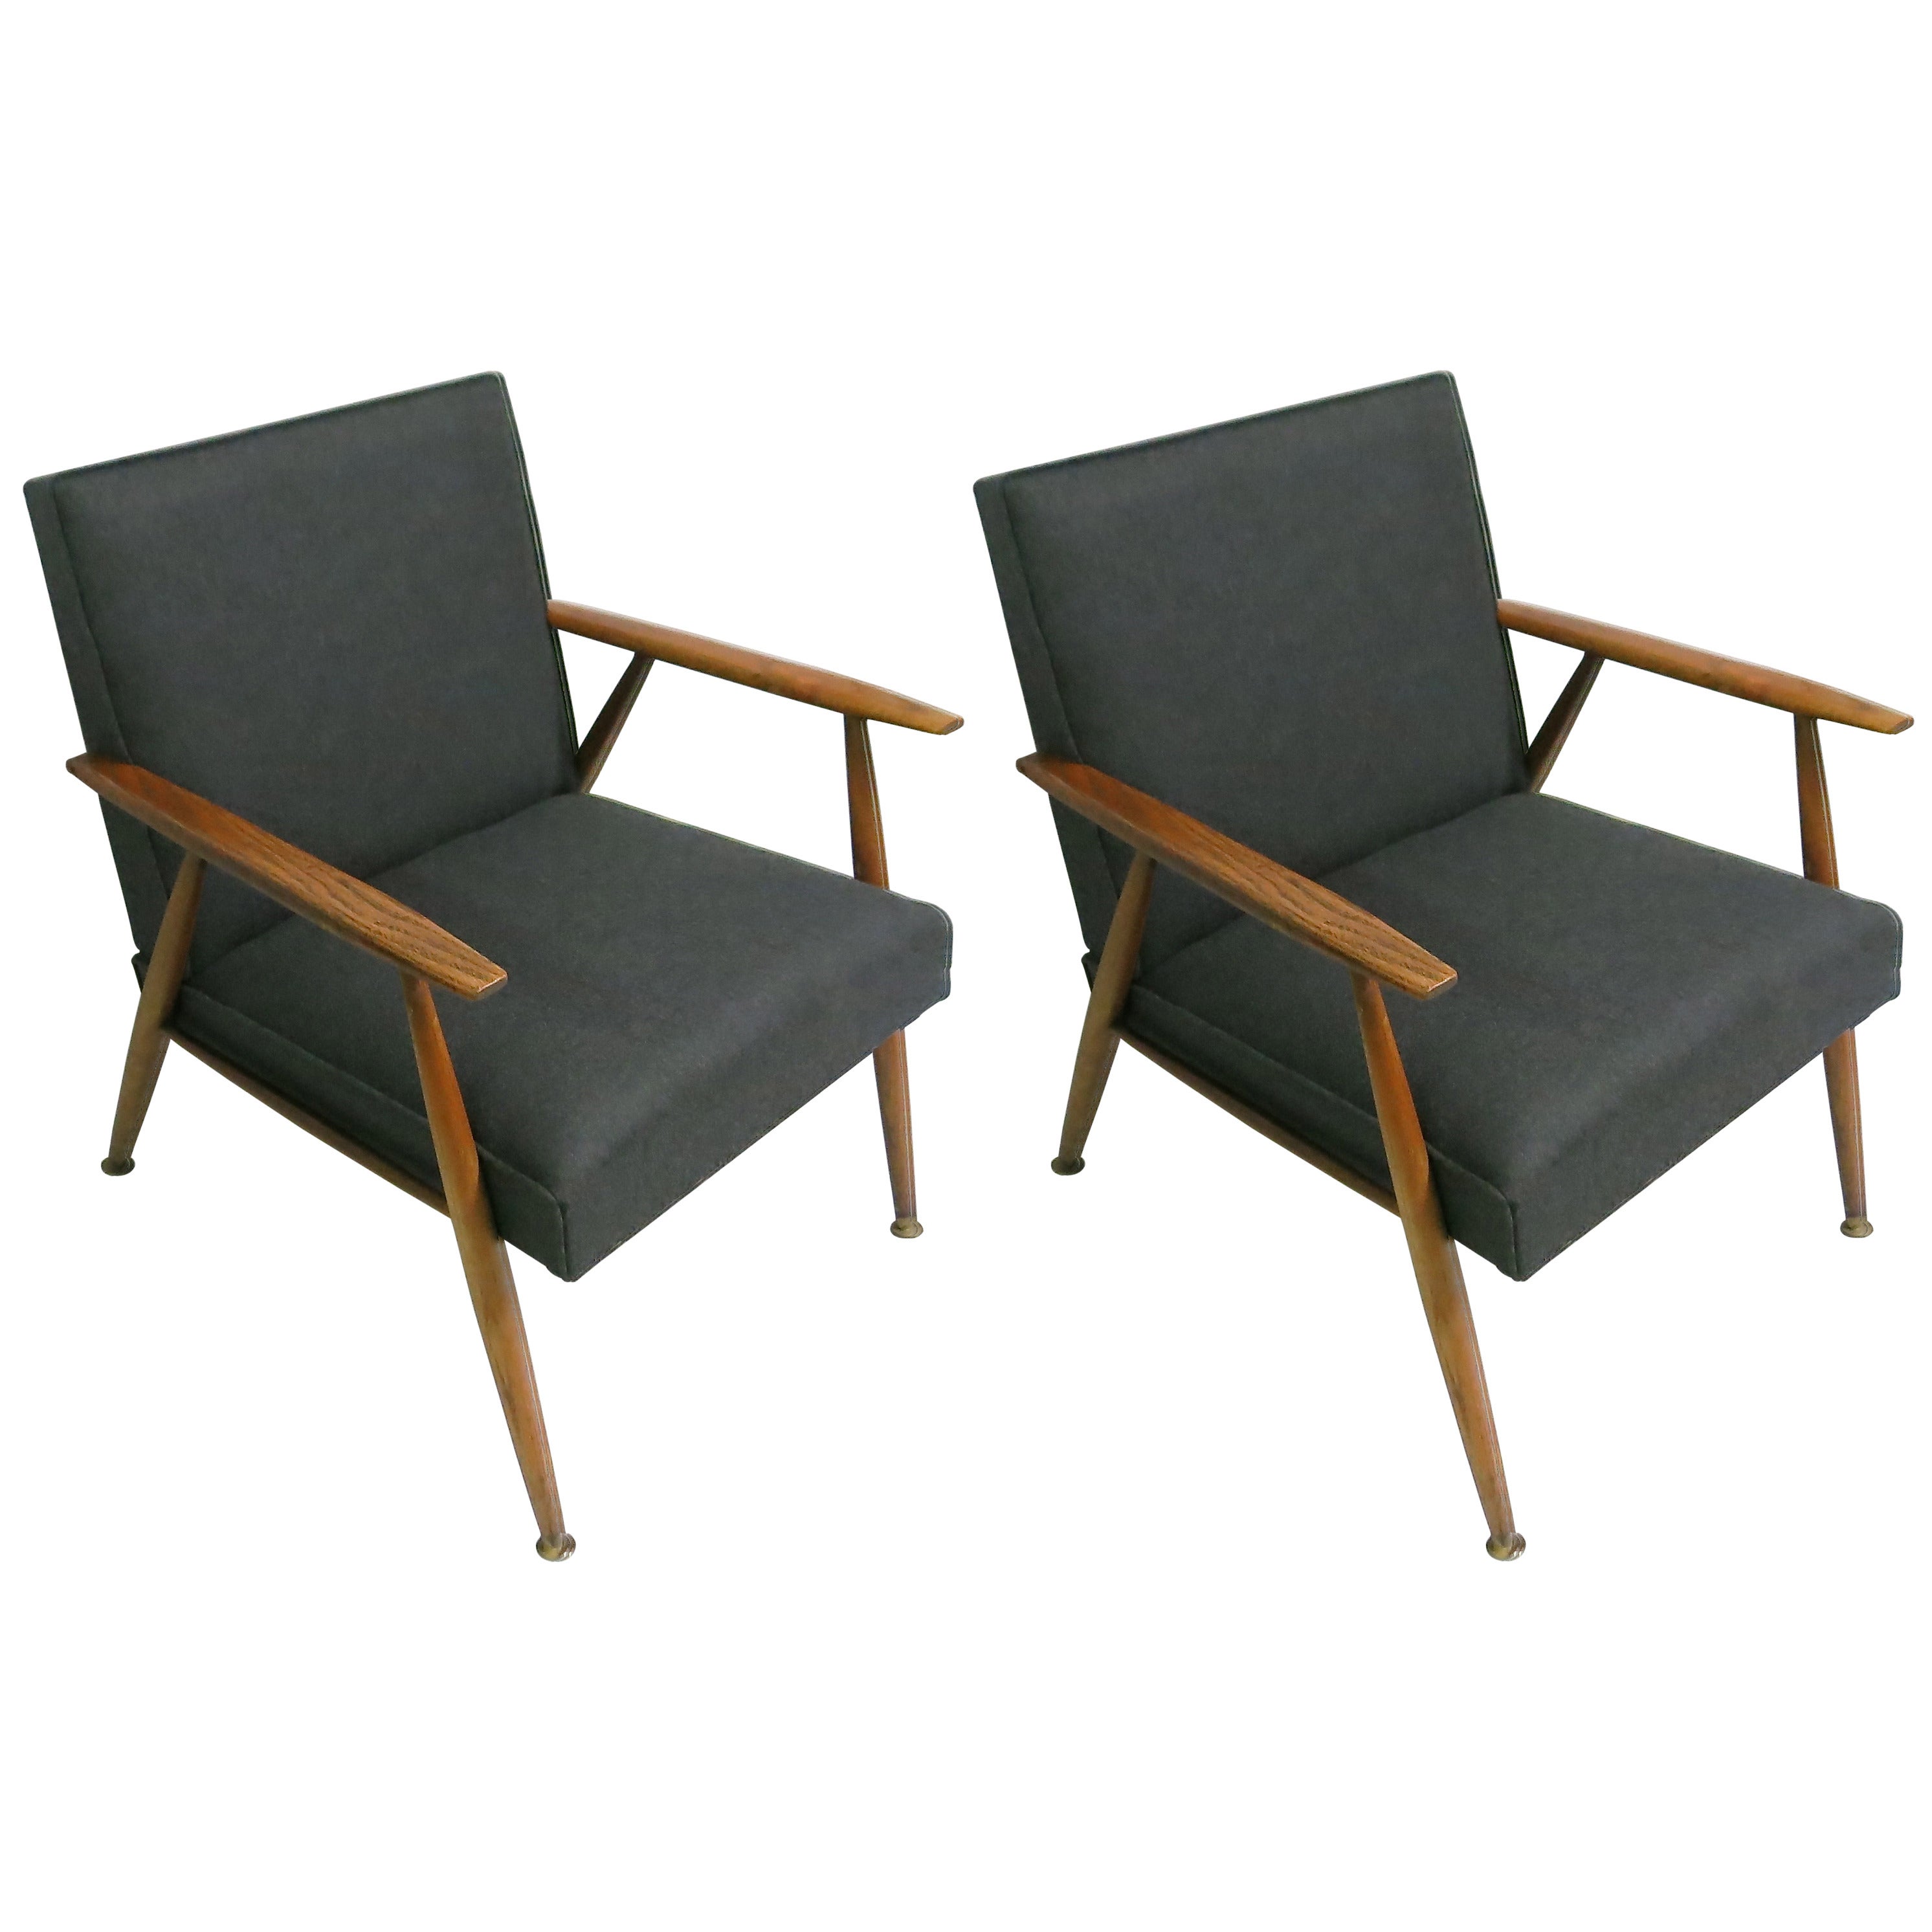 Pair of Lounge Chairs, circa 1950s, Made in Italy